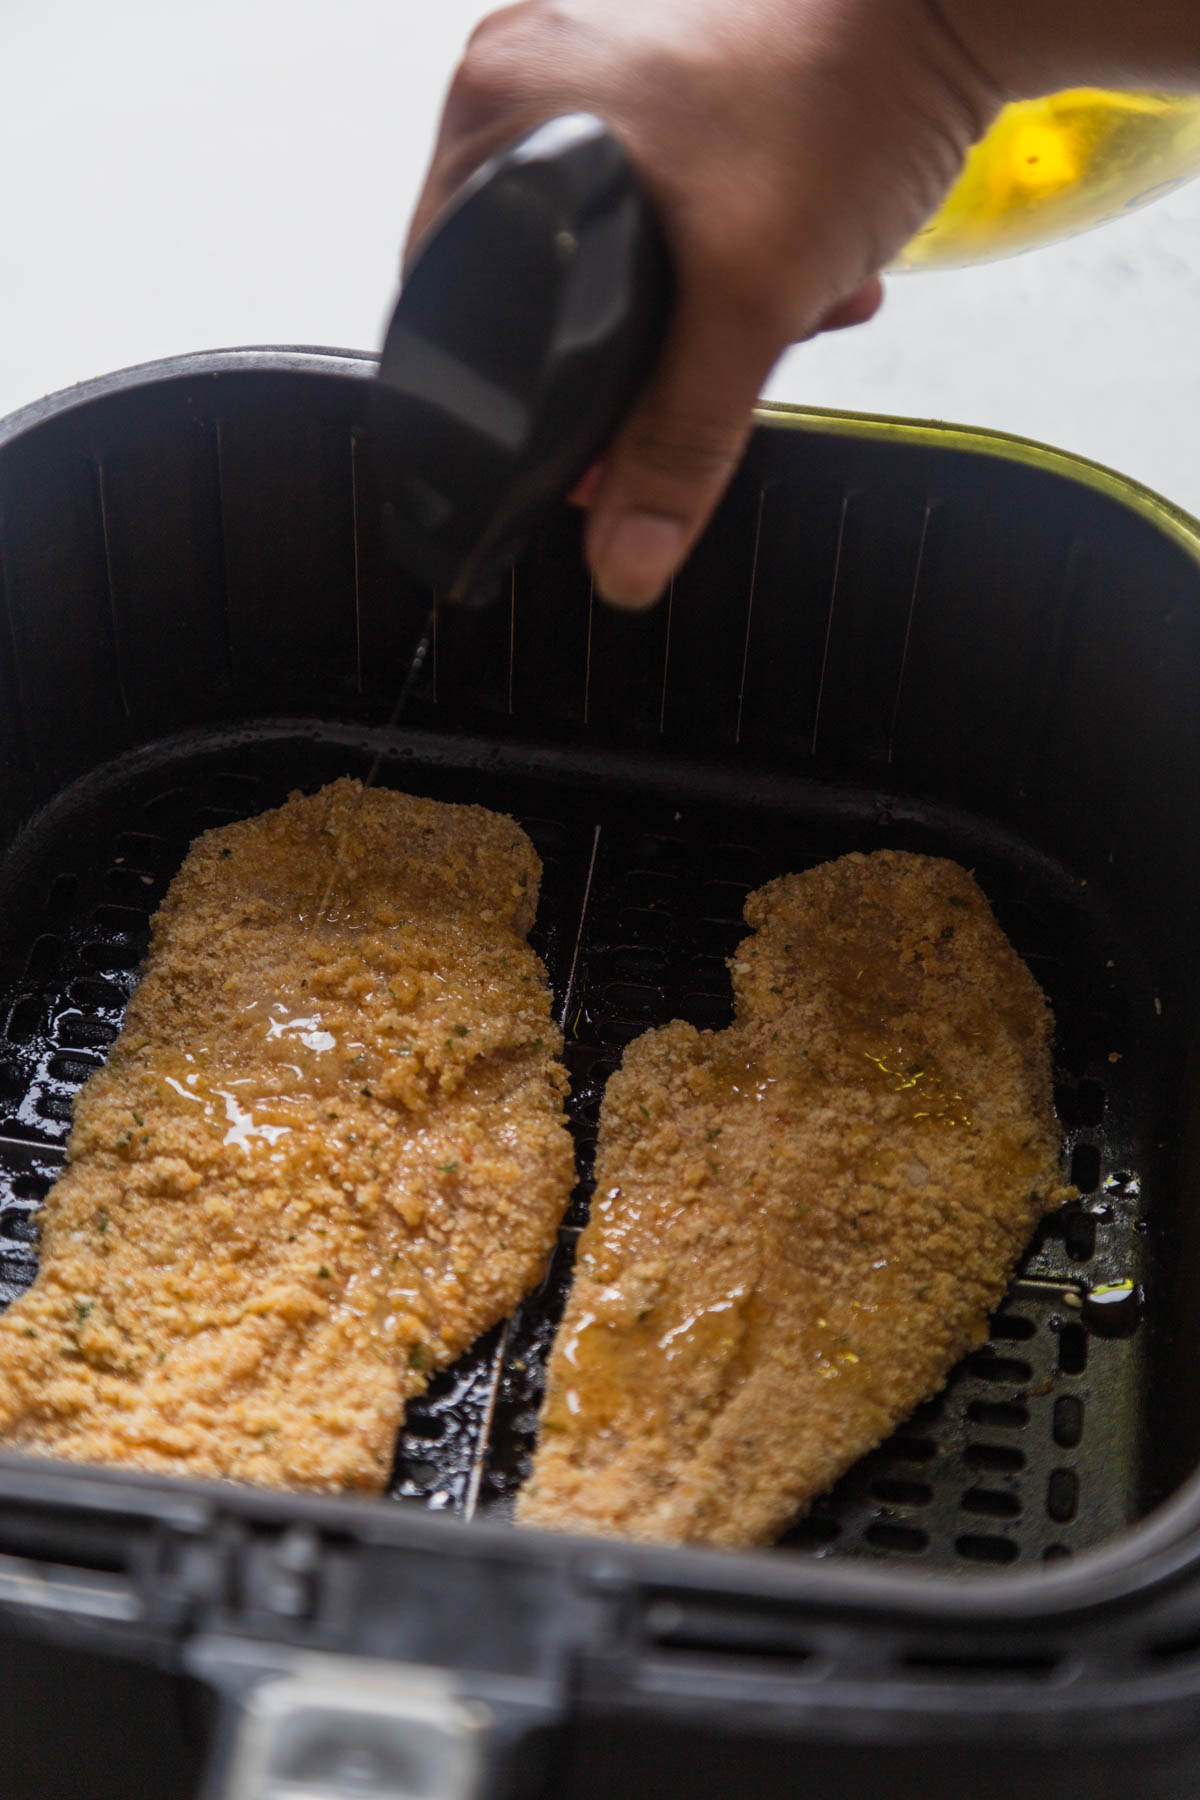 spraying oil on the breaded chicken cutlets.